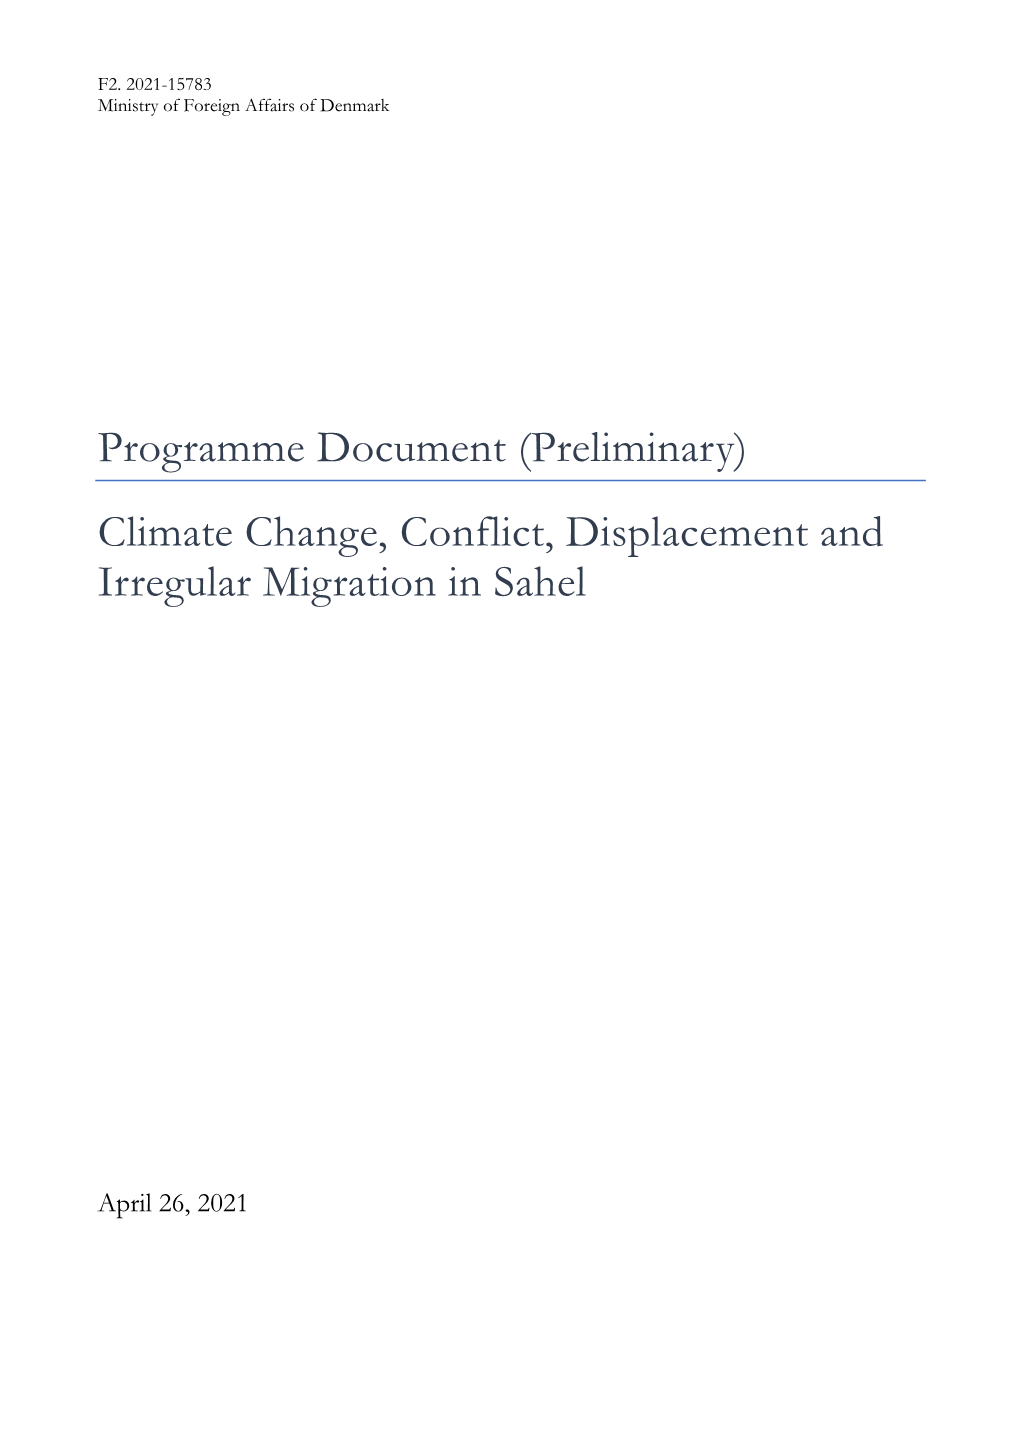 (Preliminary) Climate Change, Conflict, Displacement and Irregular Migration in Sahel